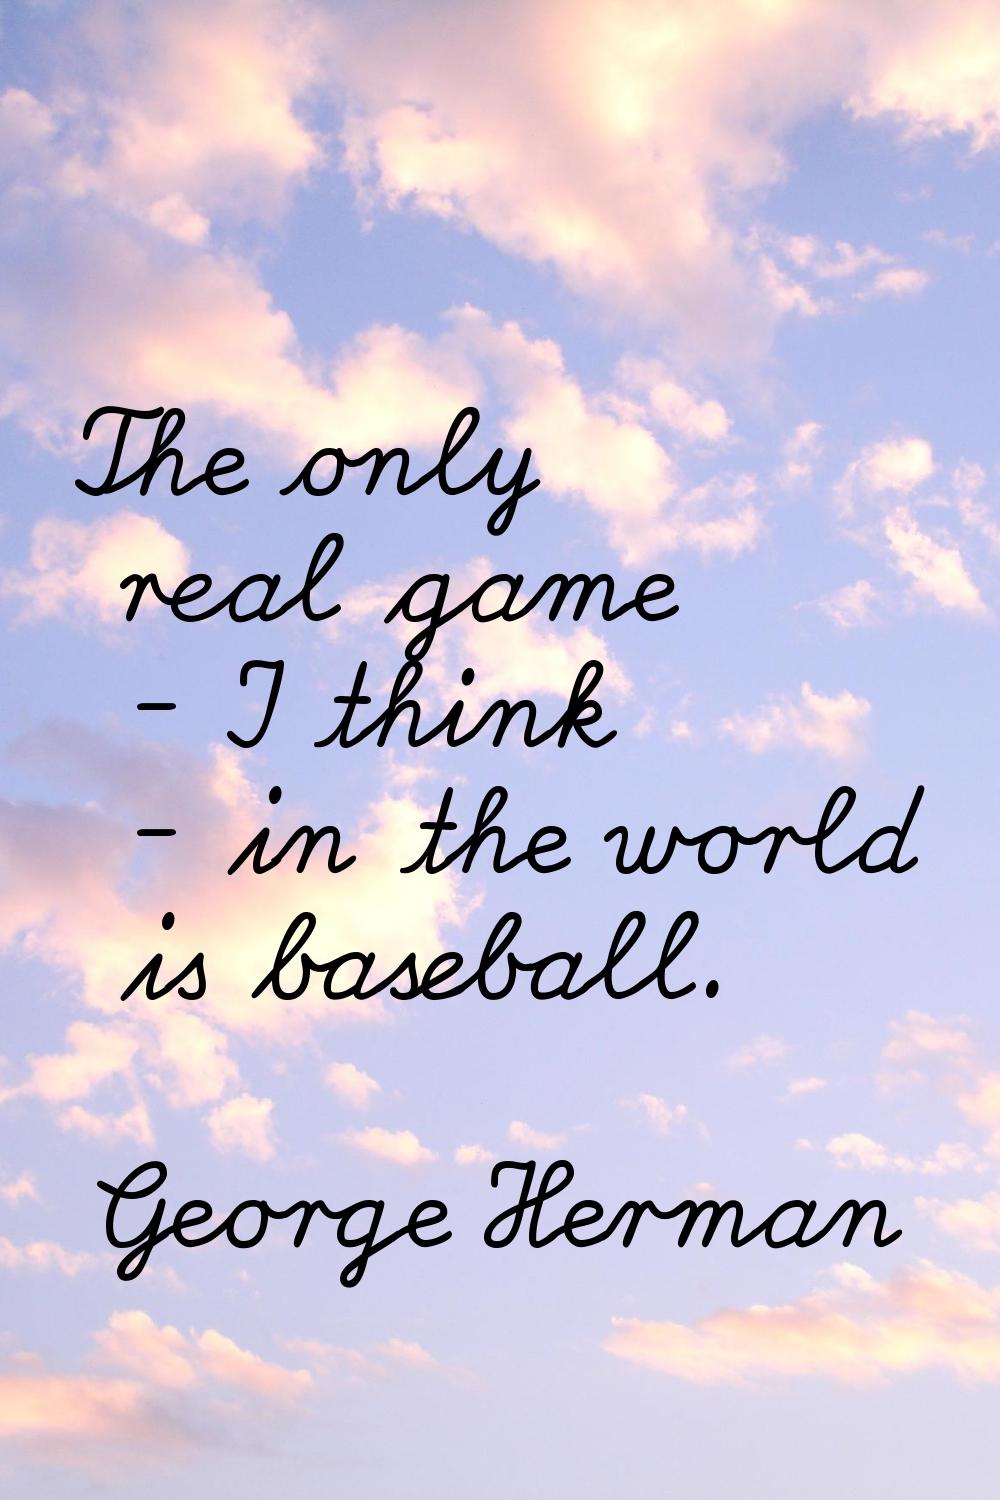 The only real game - I think - in the world is baseball.